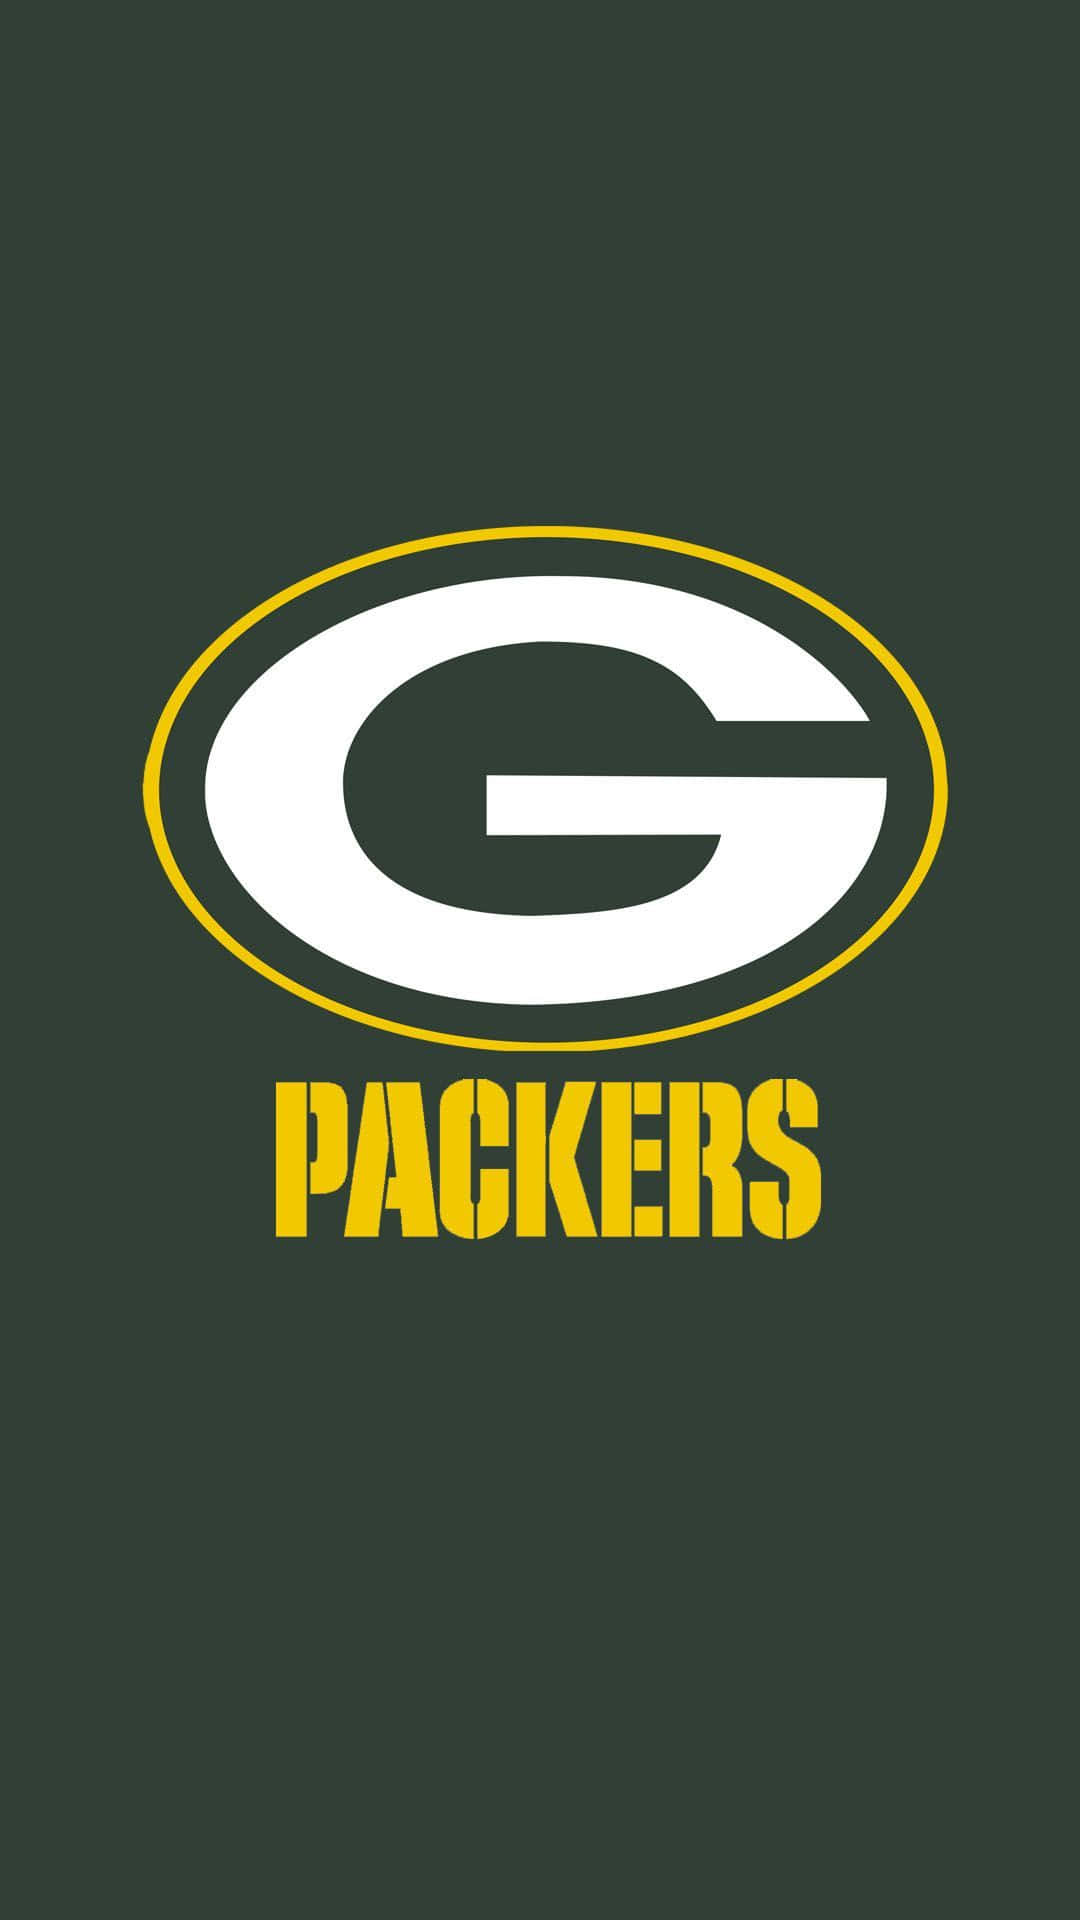 Logodei Green Bay Packers Sul Campo